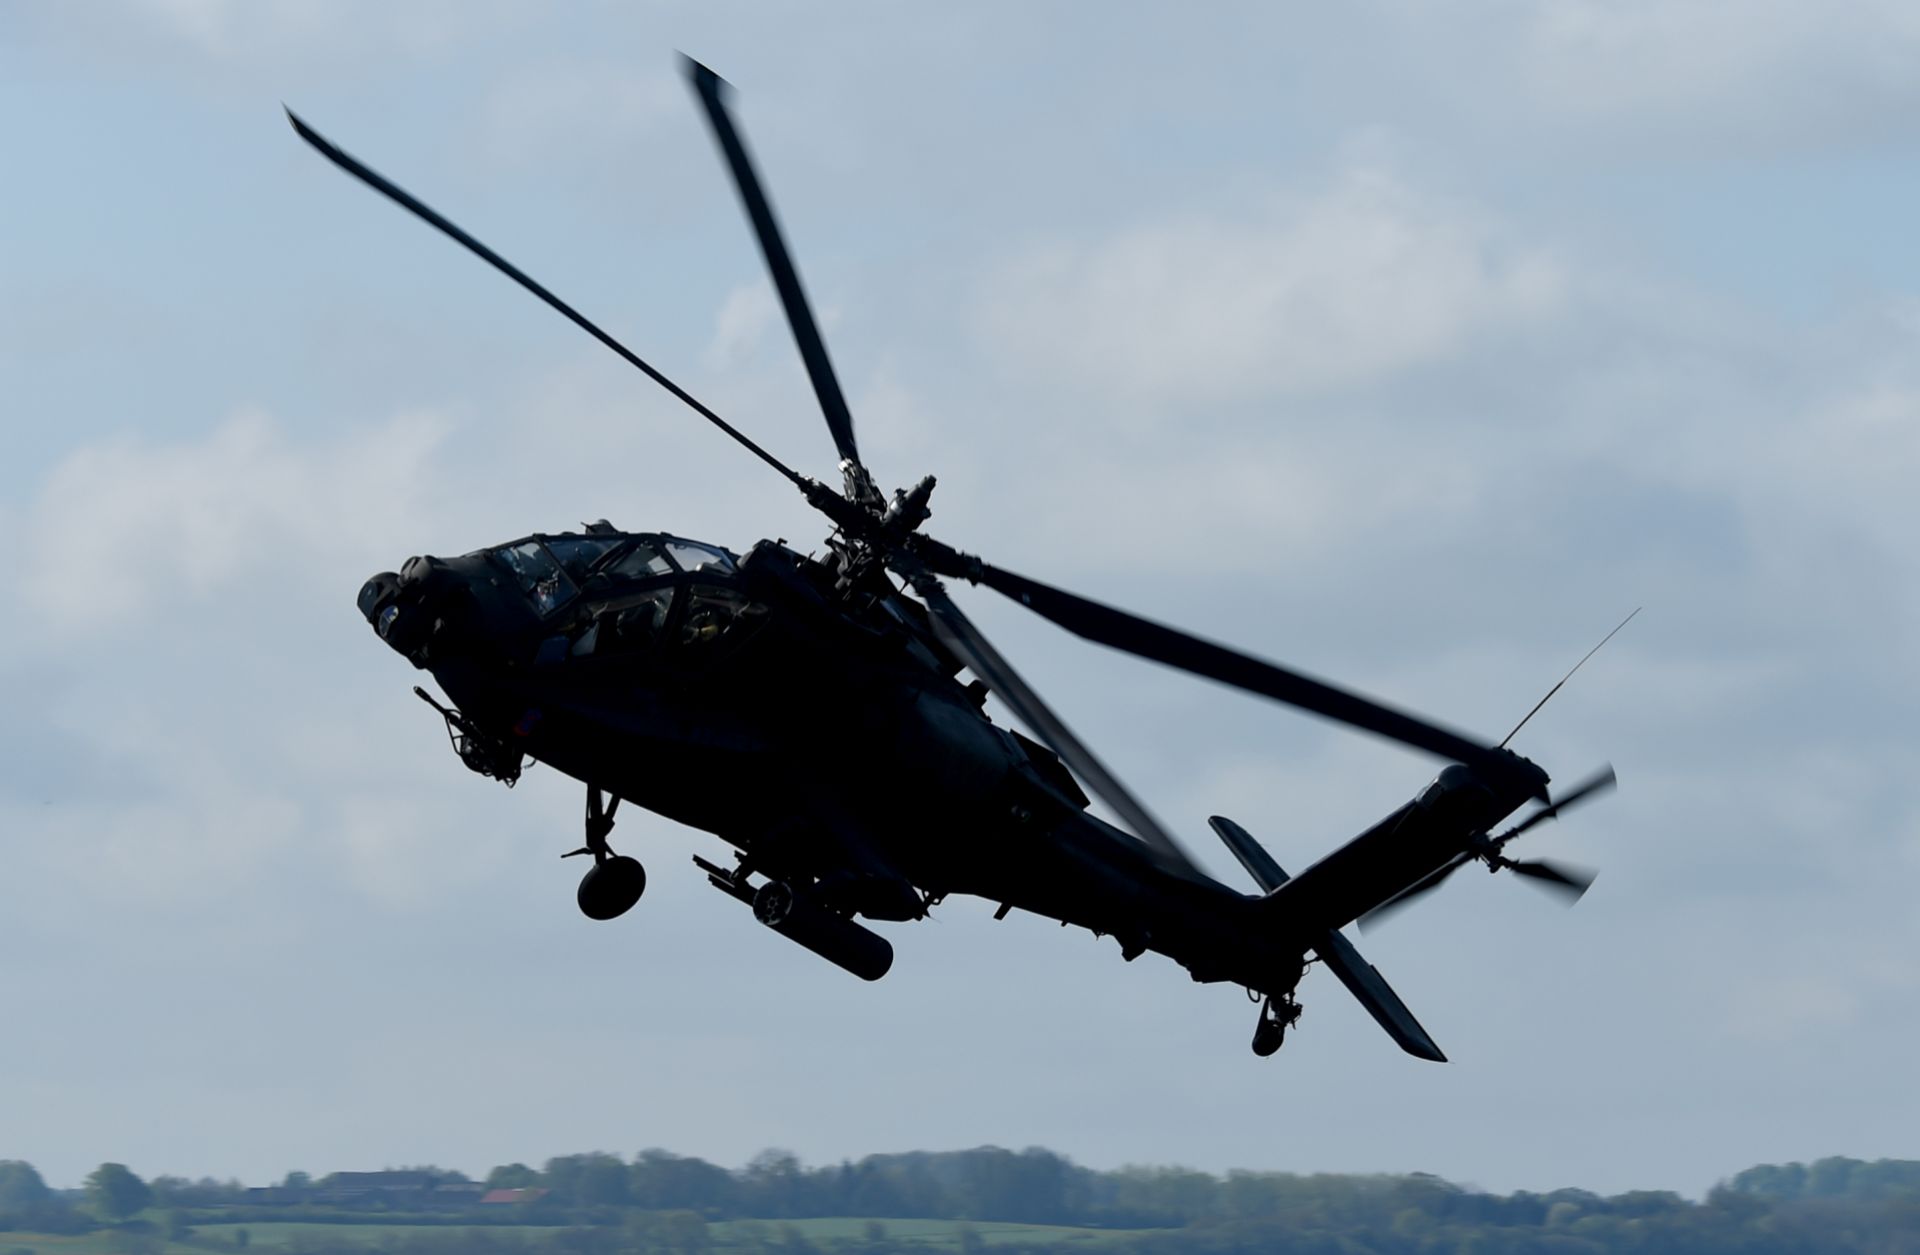 An image of a combat helicopter, type "Apache," of the U.S. Army.